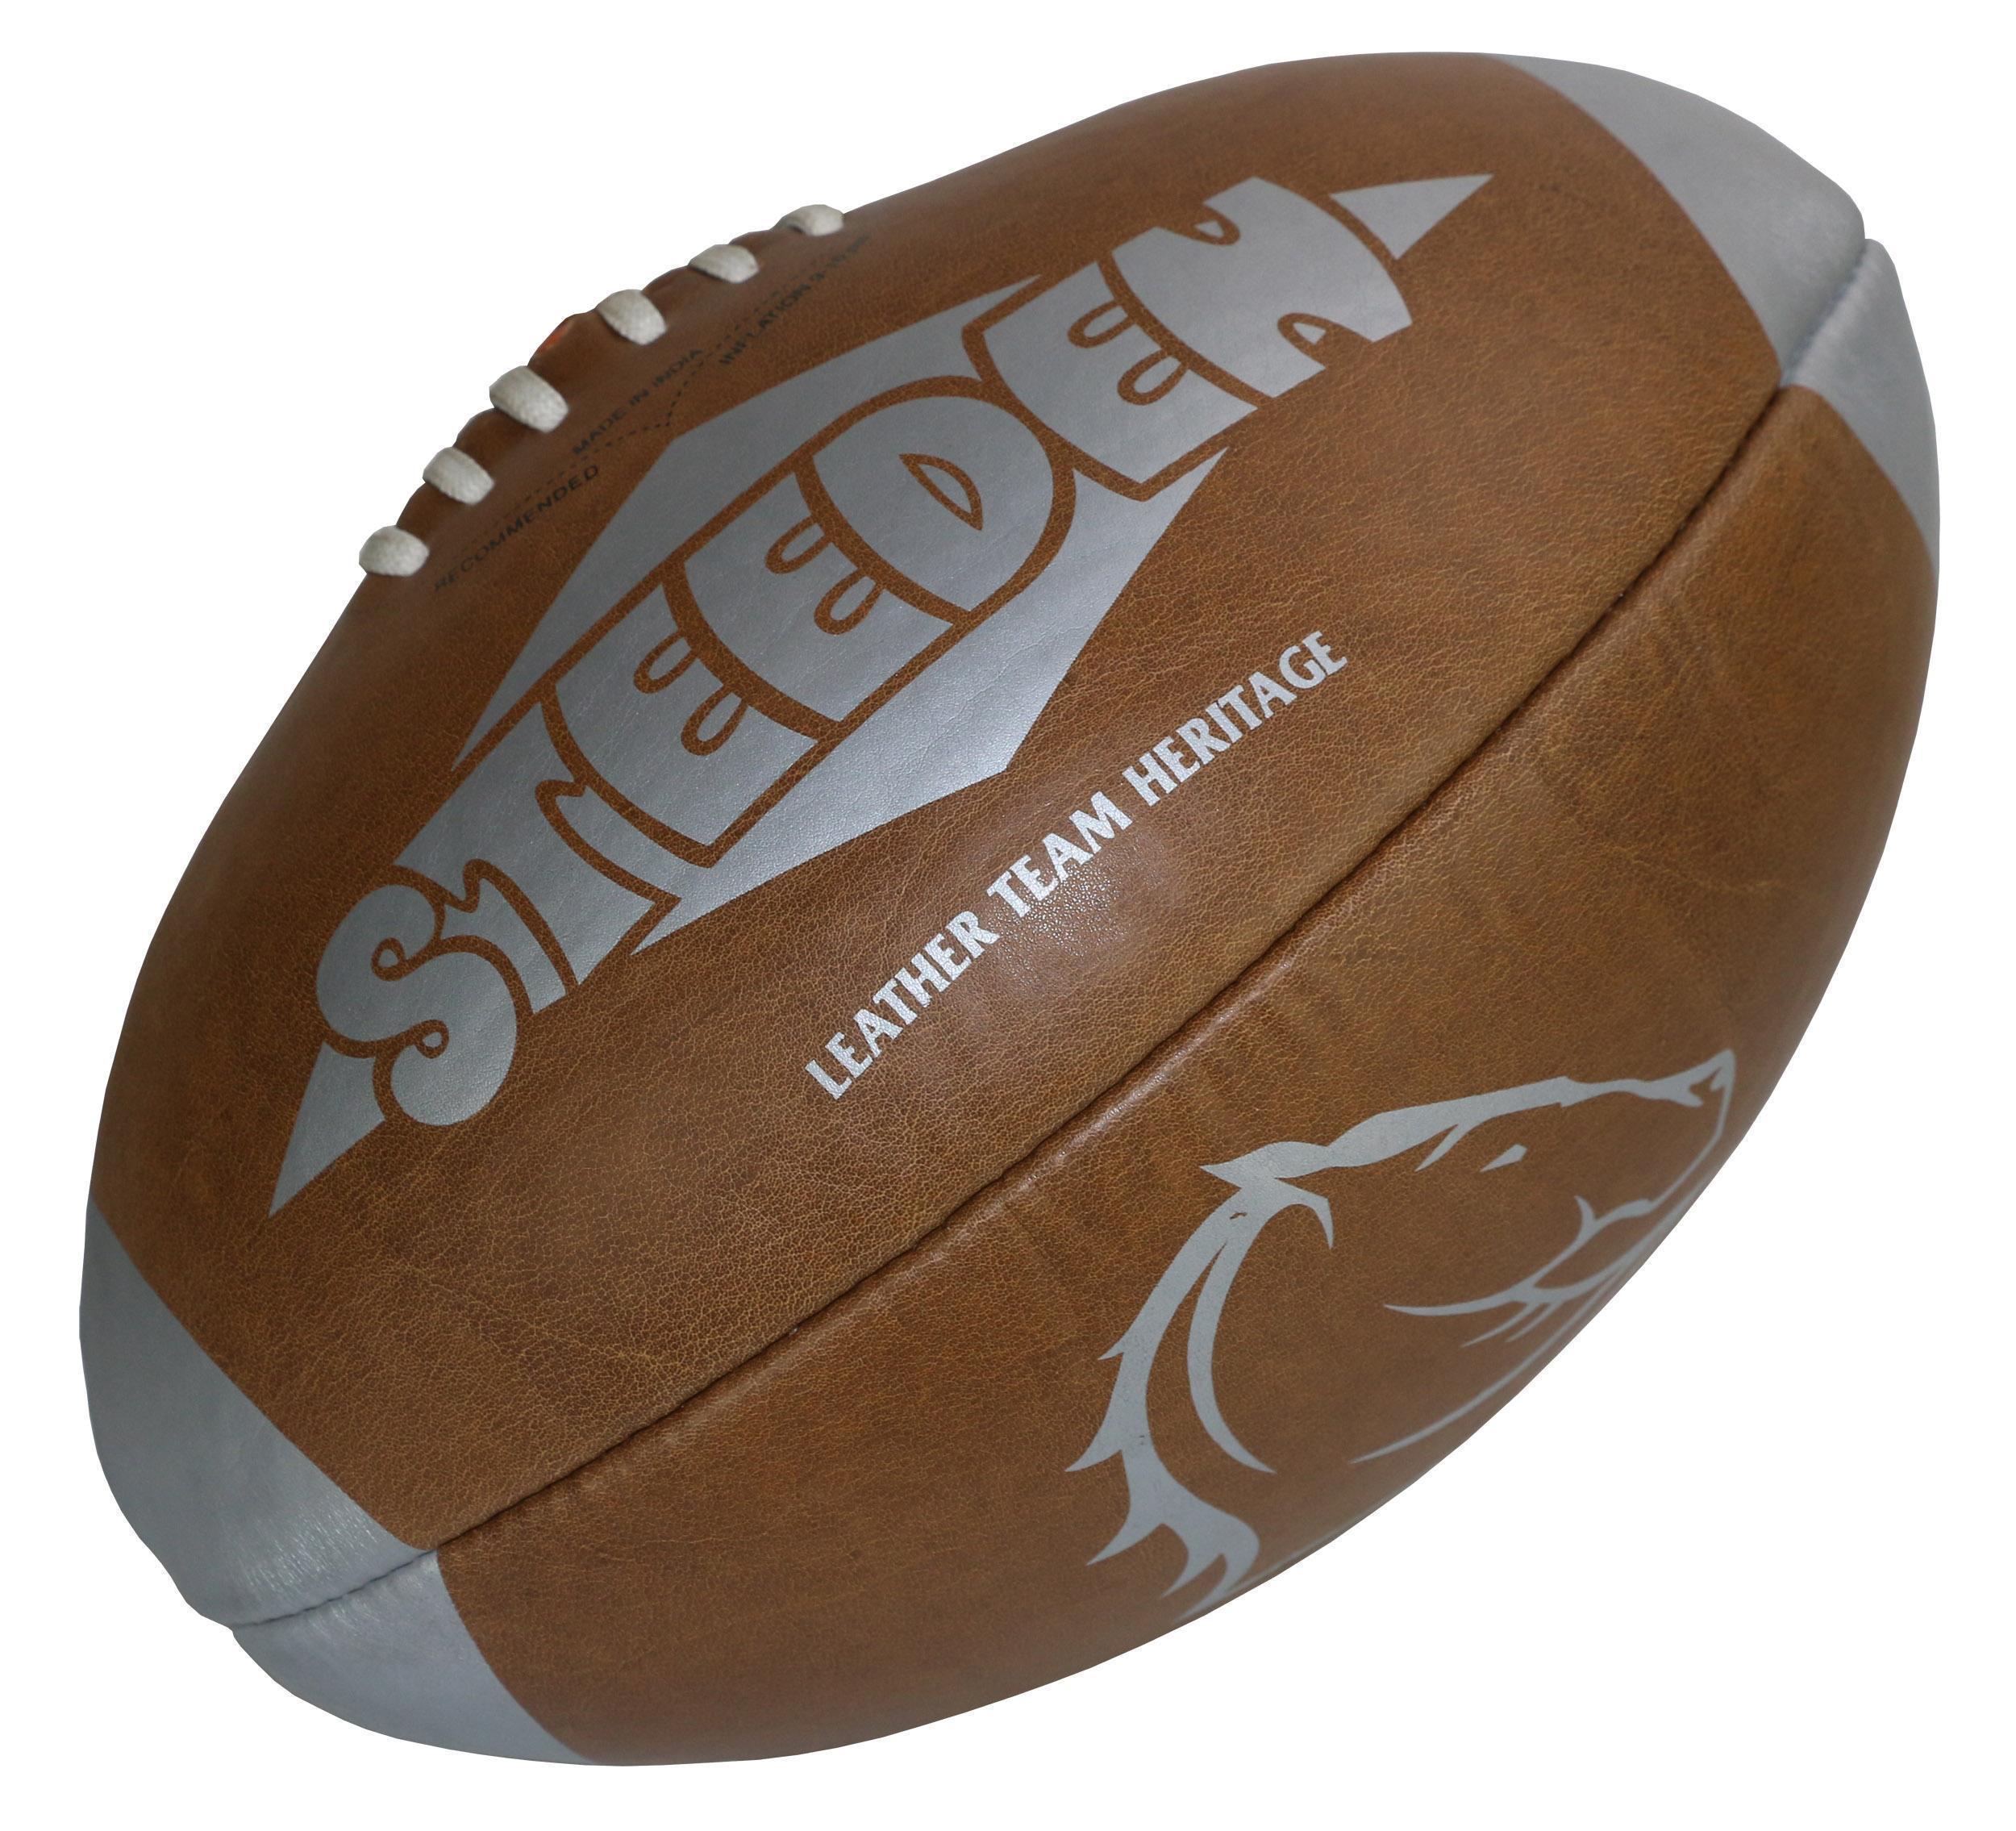 Steeden Heritage Collectable Football